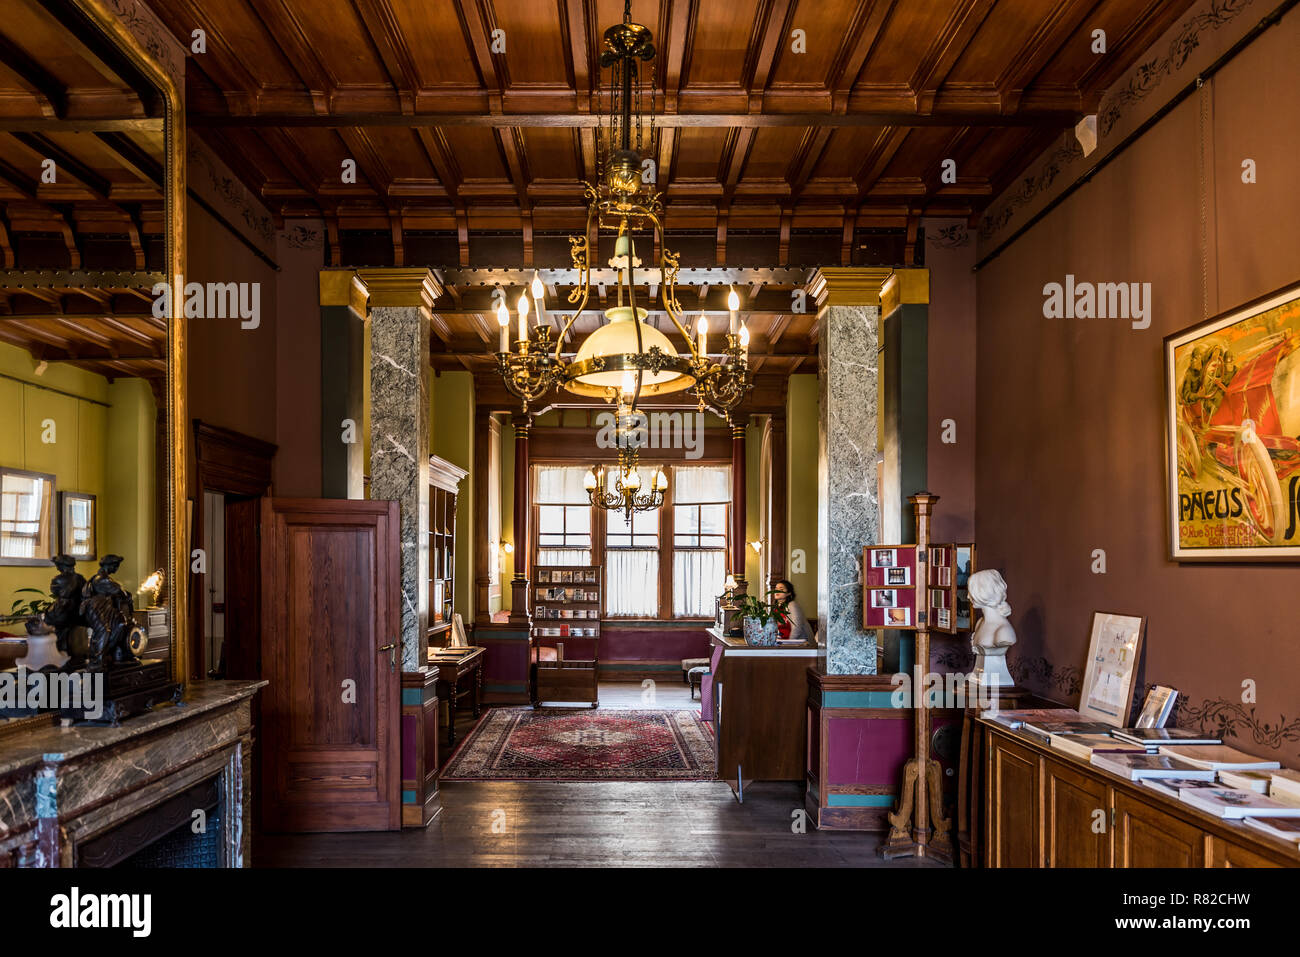 Interior desig and furniture in art Nouveau style of the Maison Autrique,  the first Horta house , in Schaerbeek, Brussels, Belgium Stock Photo - Alamy